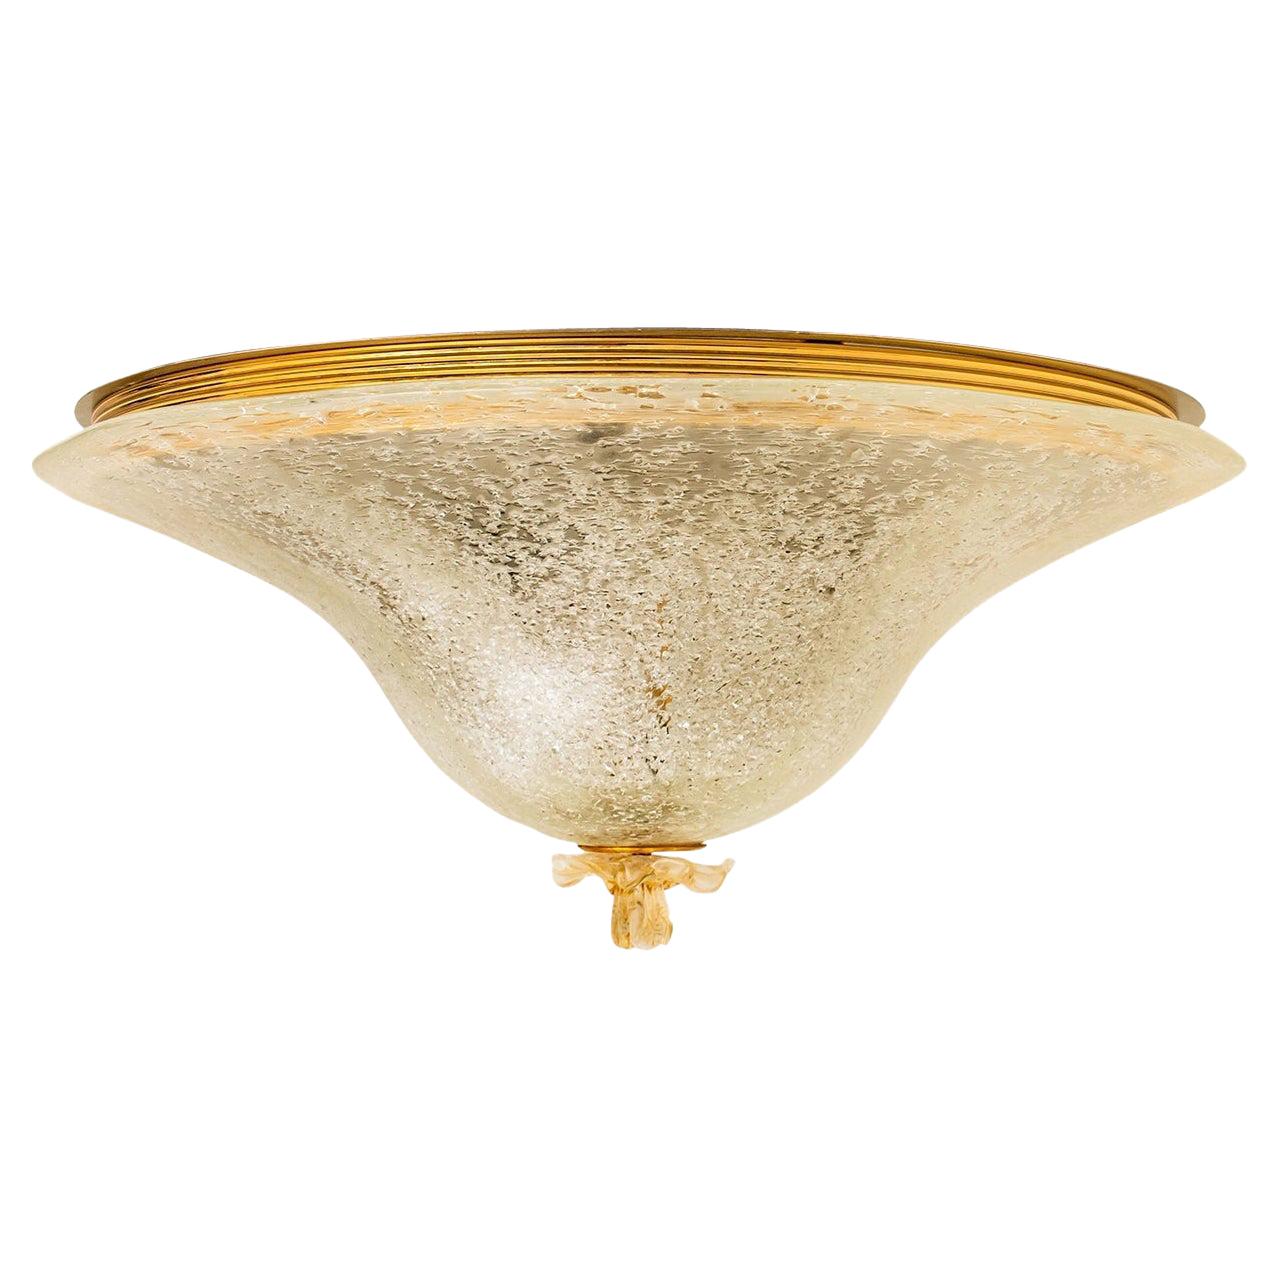 Flush Mount with Clear and Gold Brown Murano Glass by Barovier & Toso, Italy